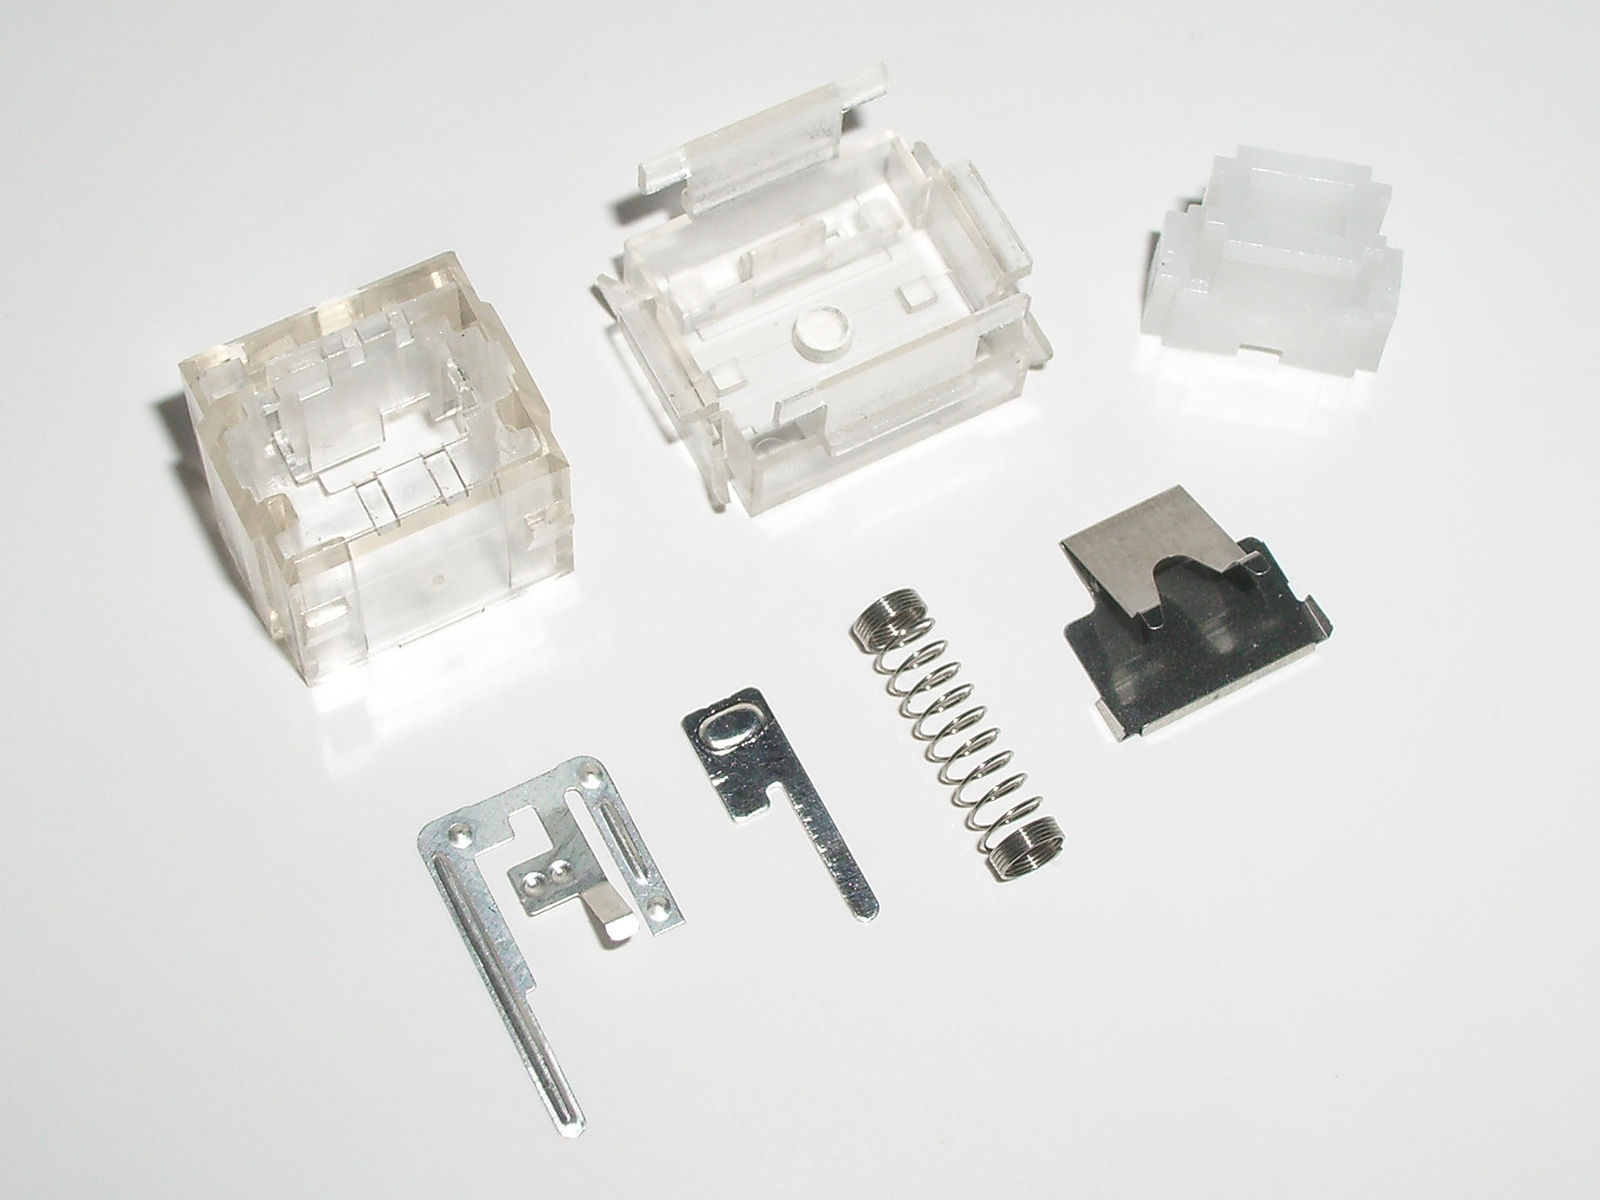 Disassembled Matias switch